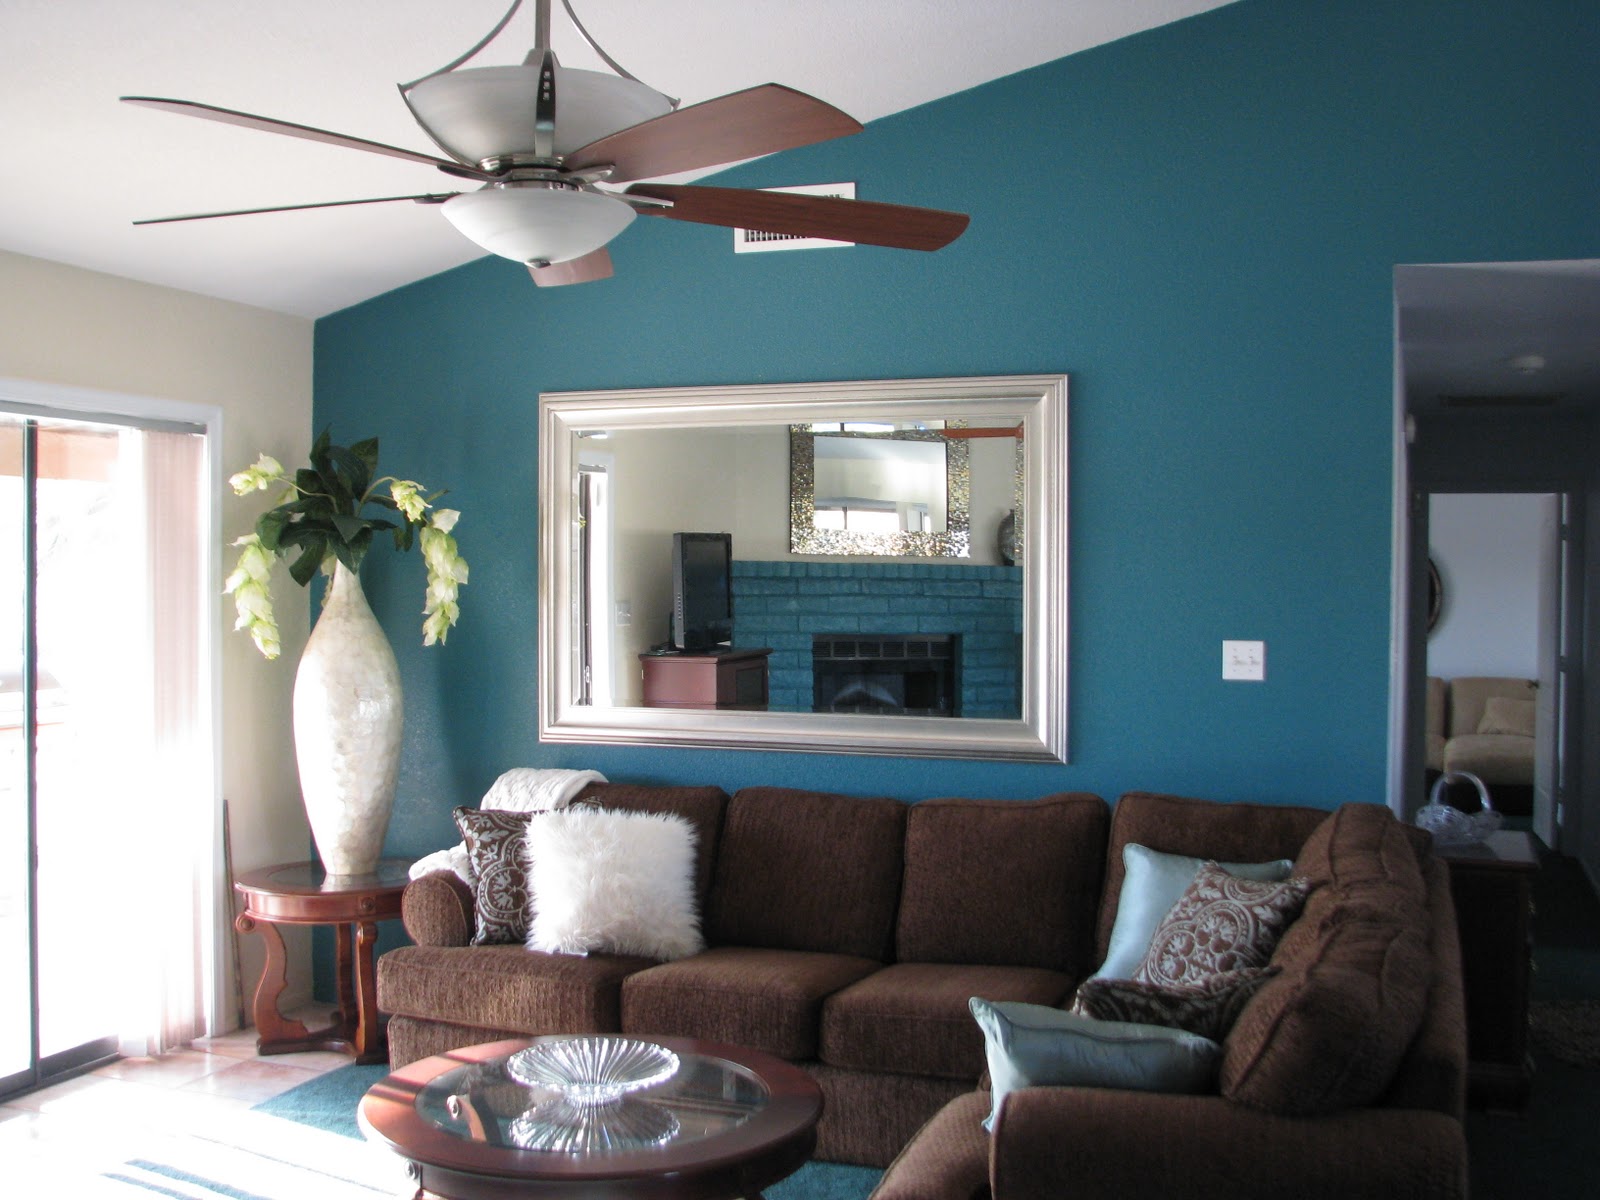 Living Room Sectional Comfy Living Room With Brown Sectional Sofa And Round Table Near Blue Calming Paint Colors Bedroom Calming Paint Colors For Bedroom